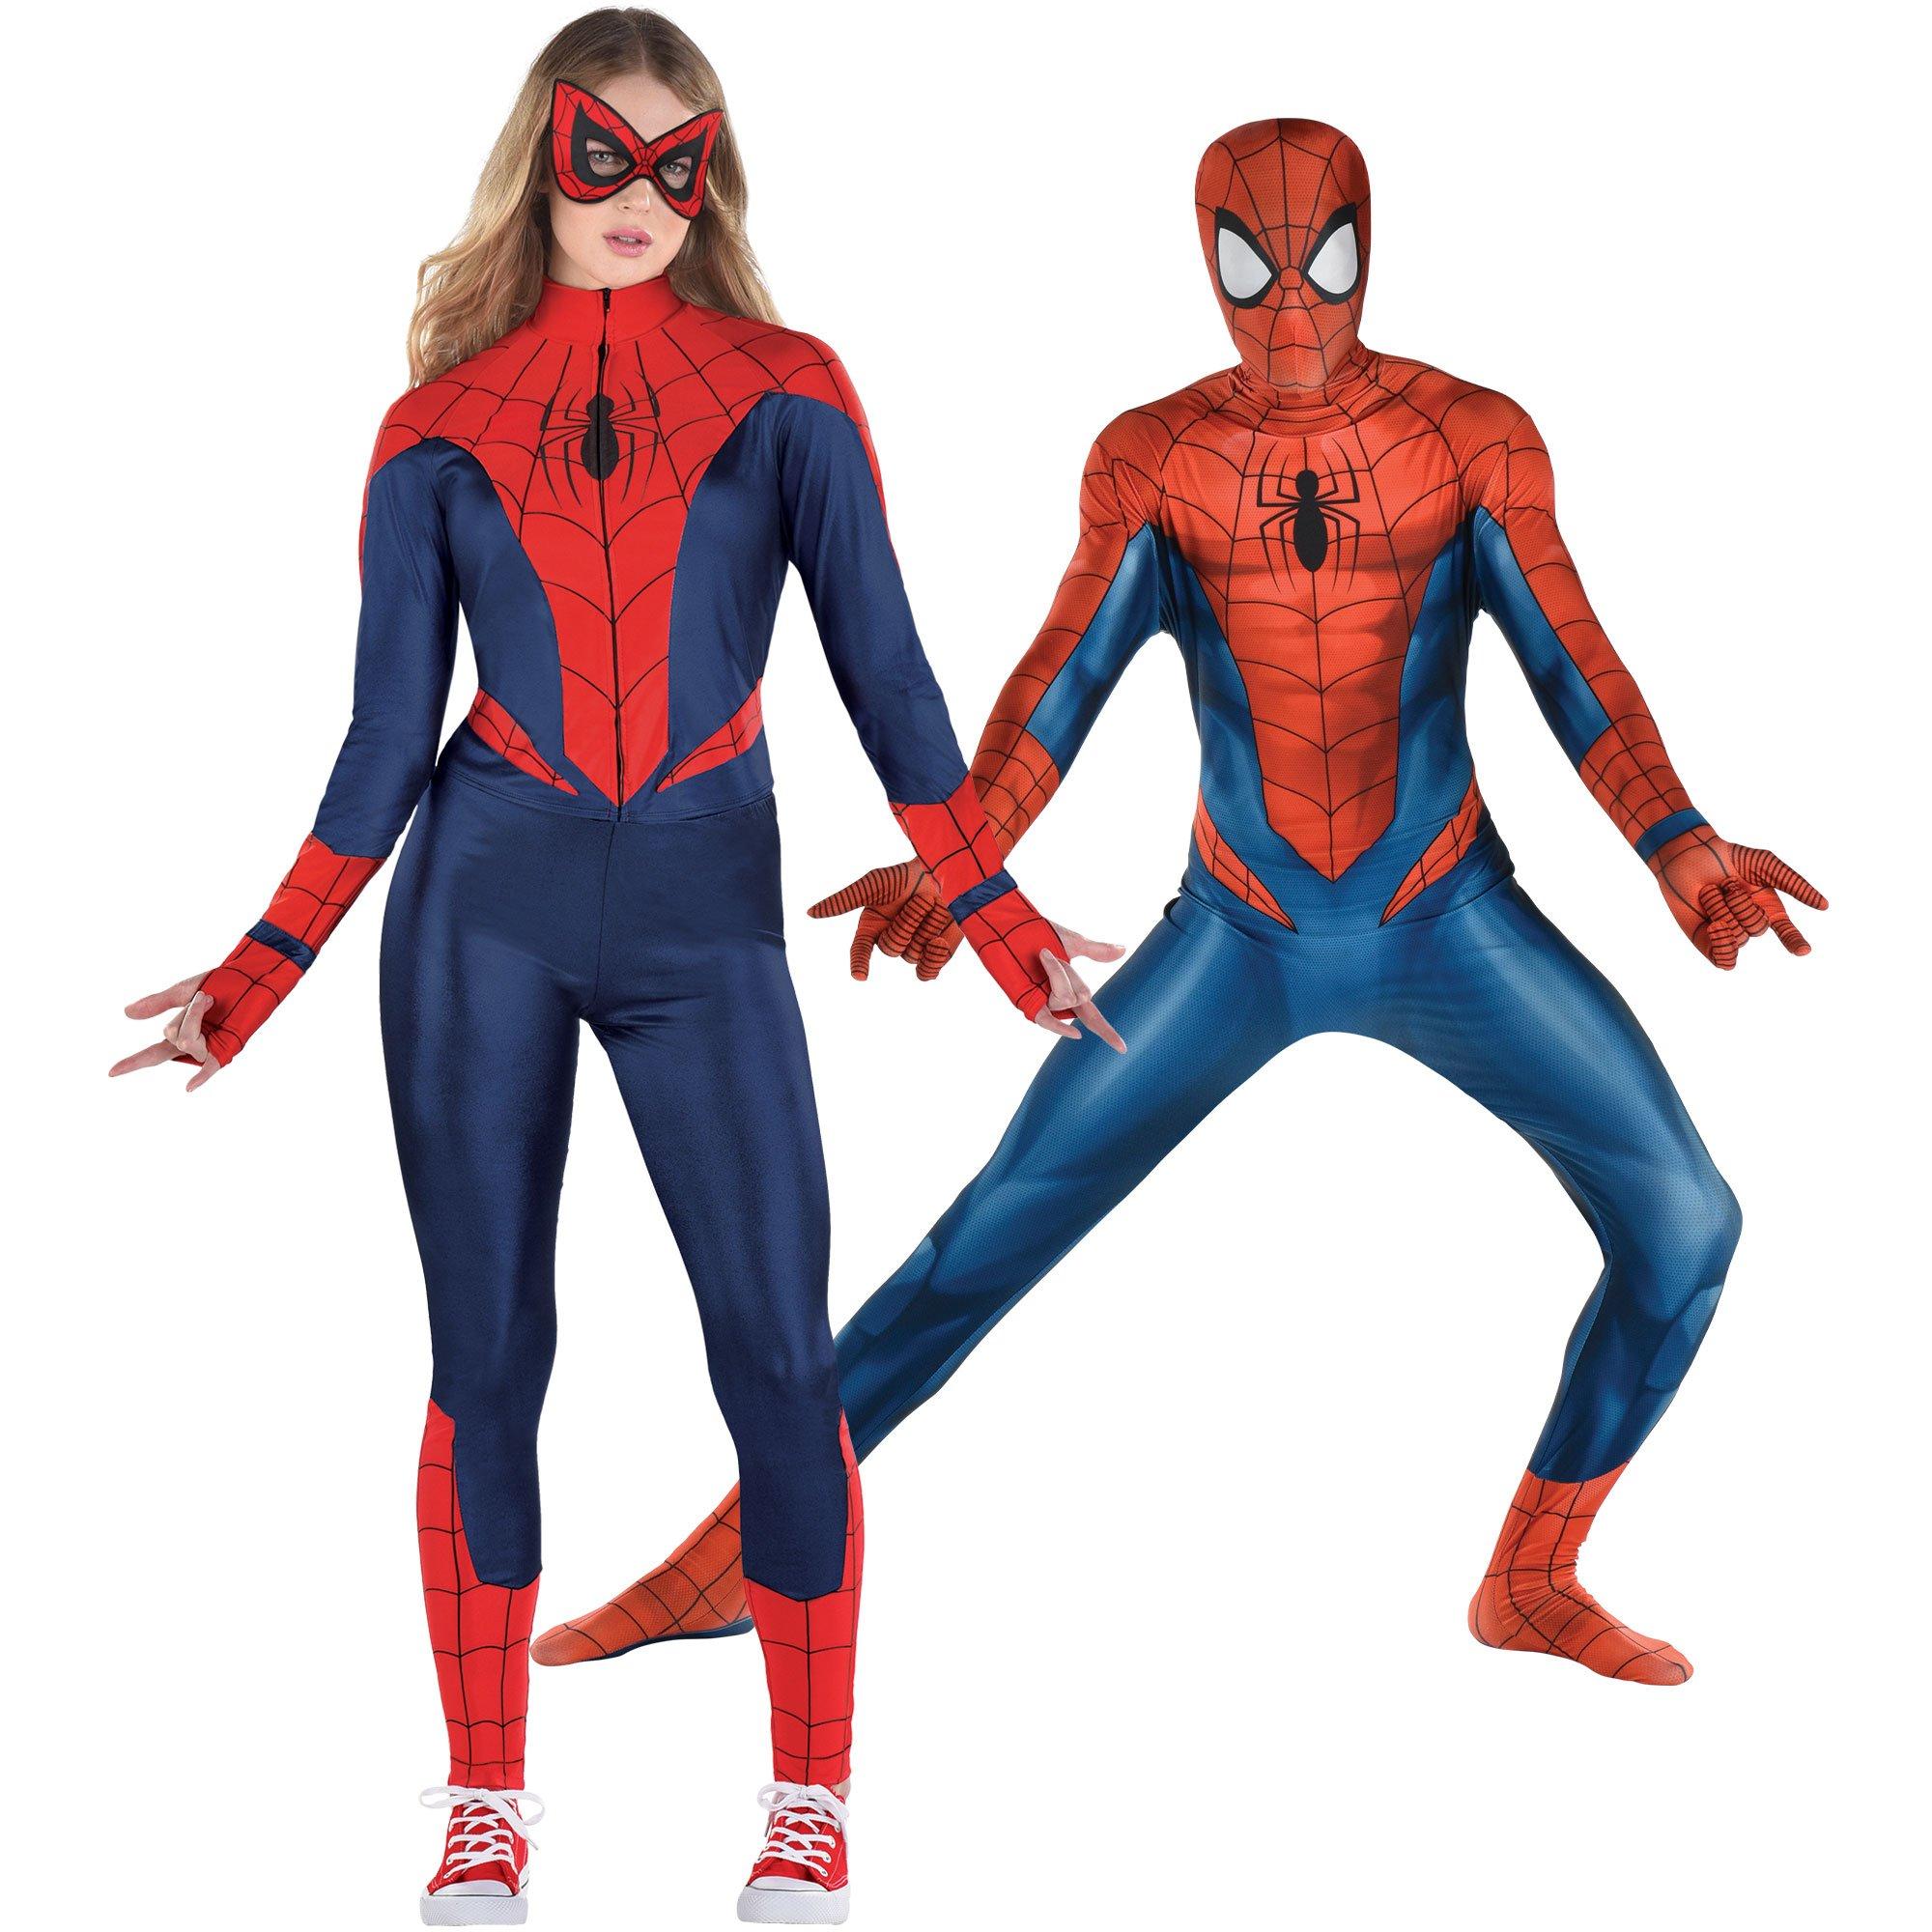 Spider-Man Family Costumes | Party City